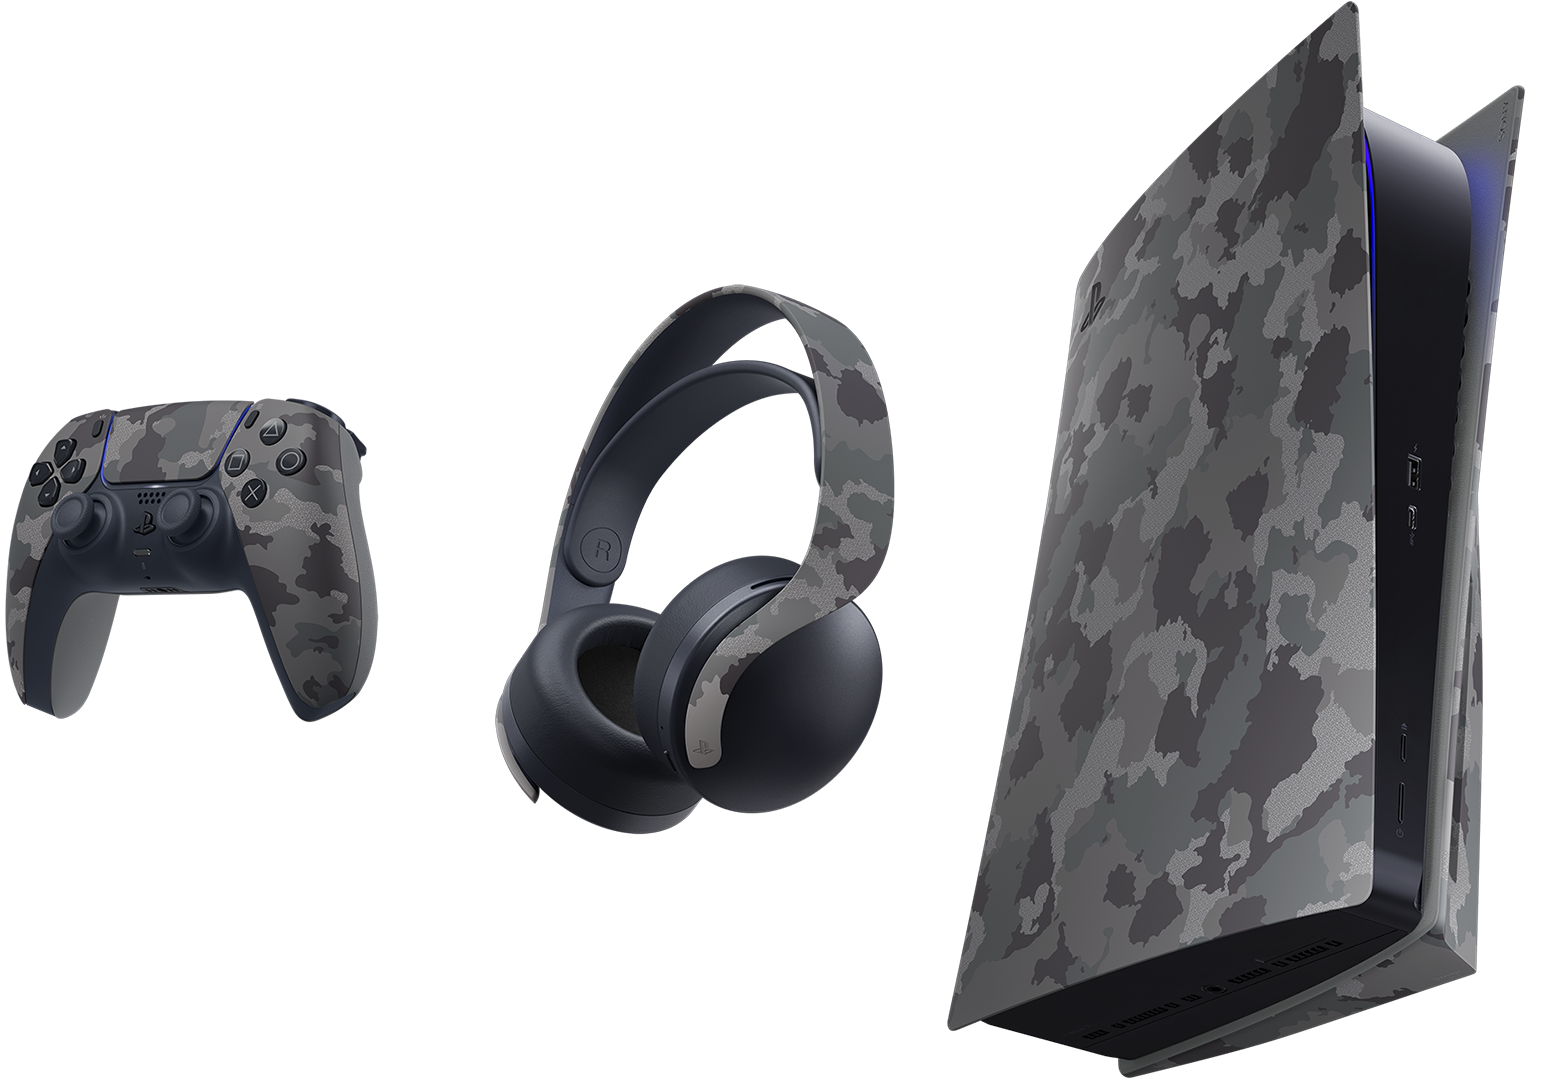 Gray Camo PS5 accessories collection